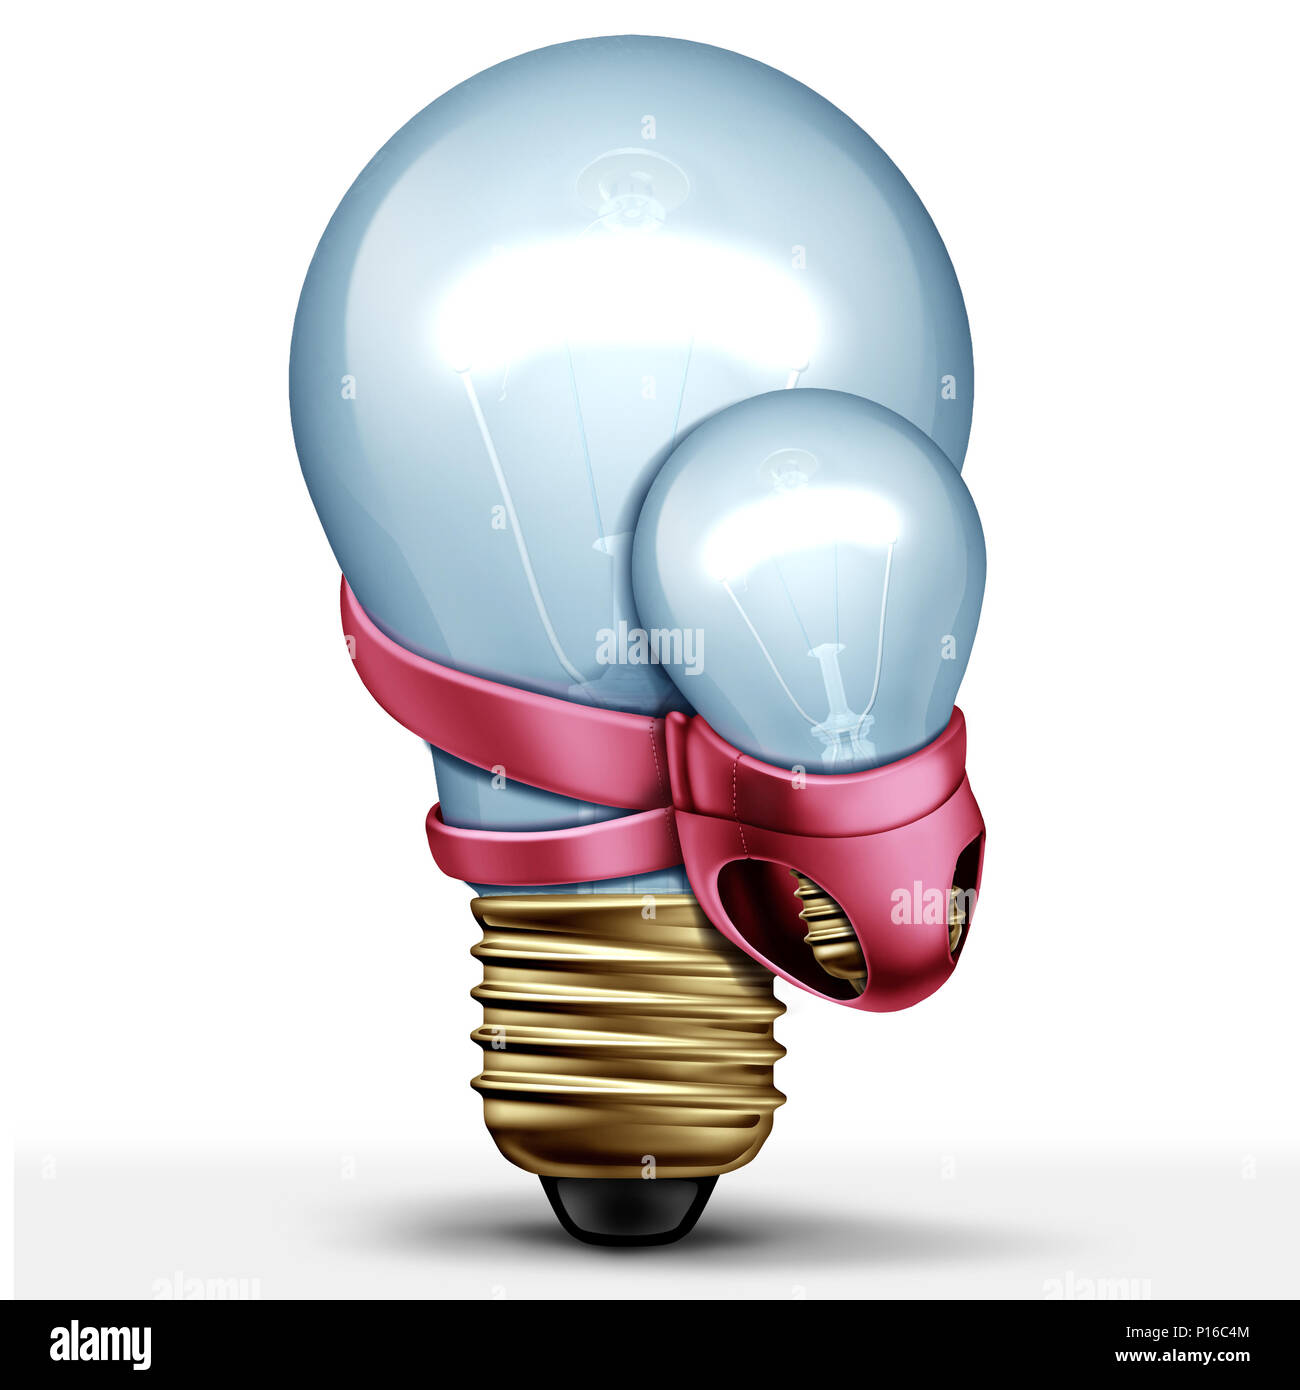 New idea creative concept and parenting solution as a lightbulb carrying a baby light as a 3D illustration. Stock Photo